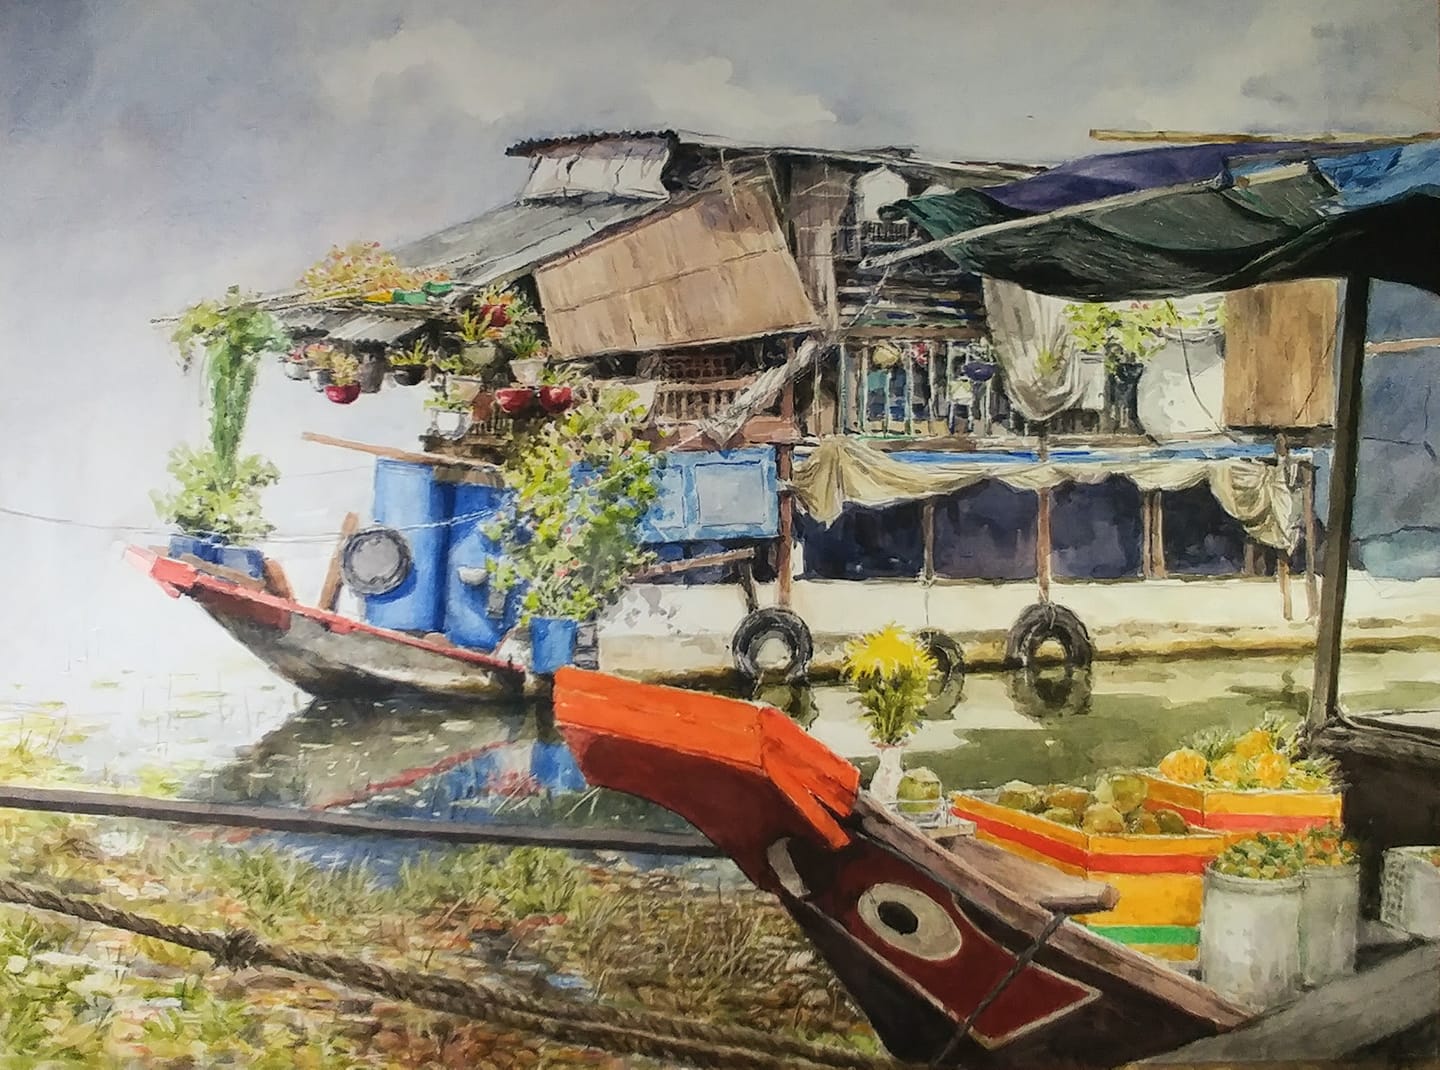 This painting by Vincent Monluc depicts boats carrying fruits and plants on the Saigon River.